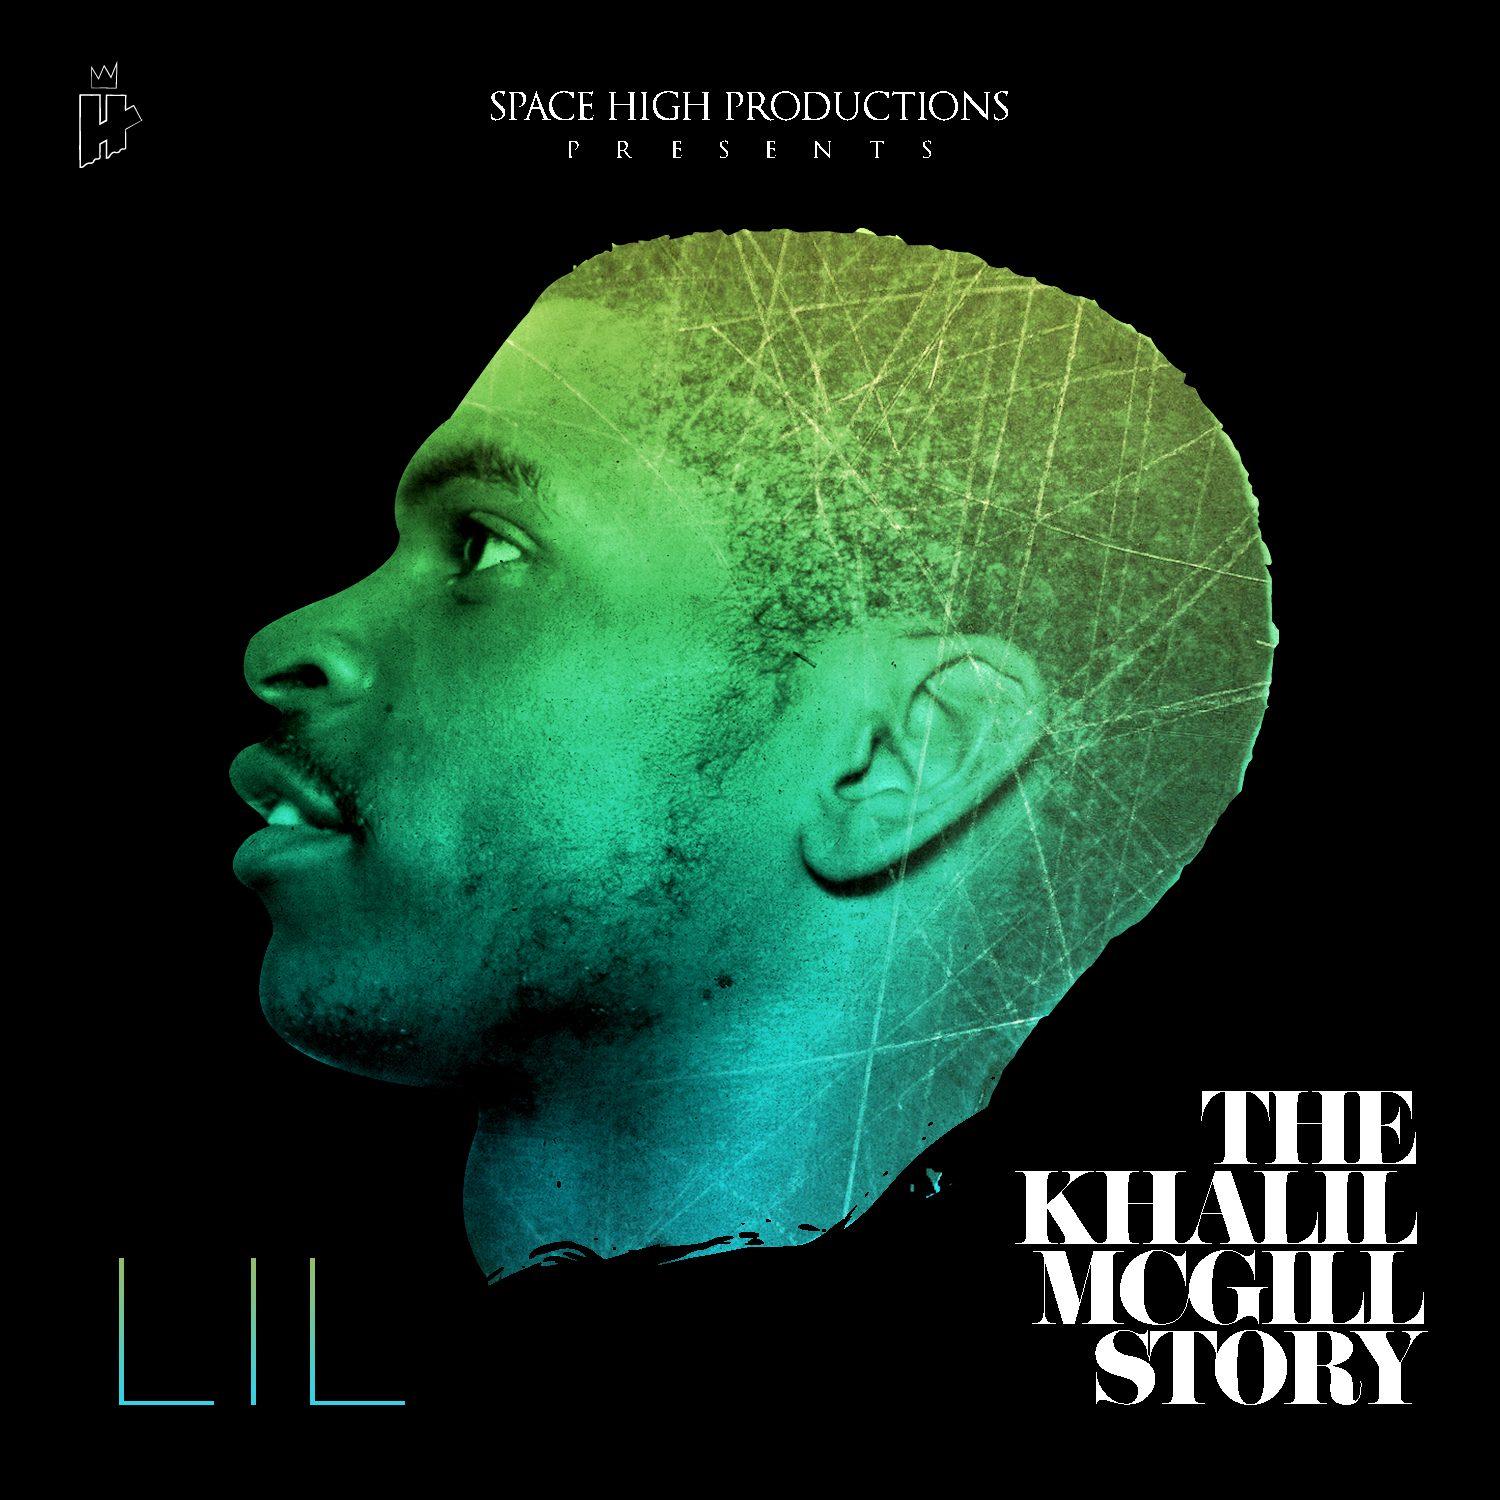 Front Lil (@Spacehigh_lil) - The Khalil McGill Story #TKMS (ALBUM)  